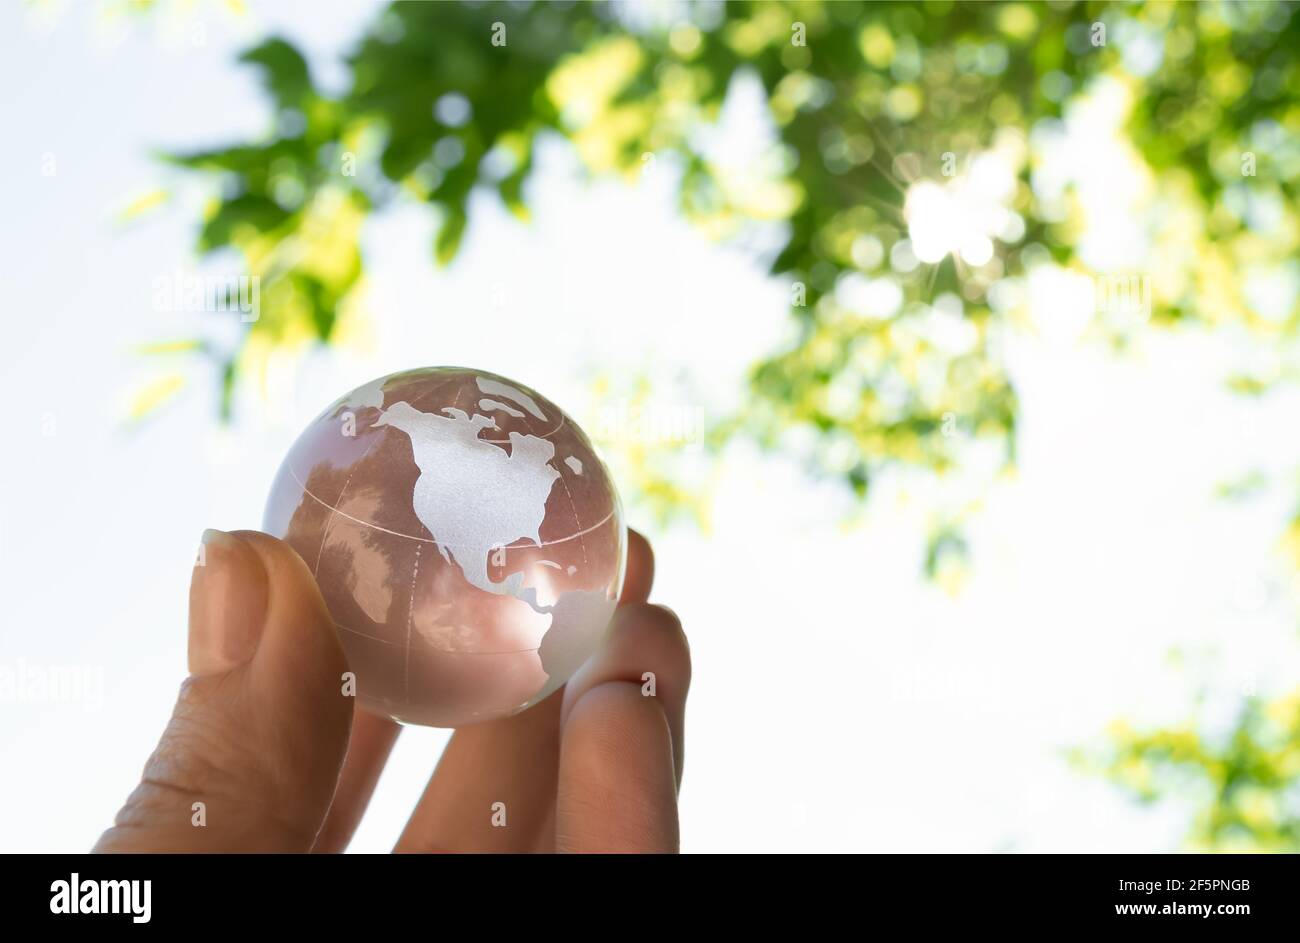 Crystal globe in the hand of a man against a background of blue sky and green foliage. Earth protection concept. nature protection Stock Photo